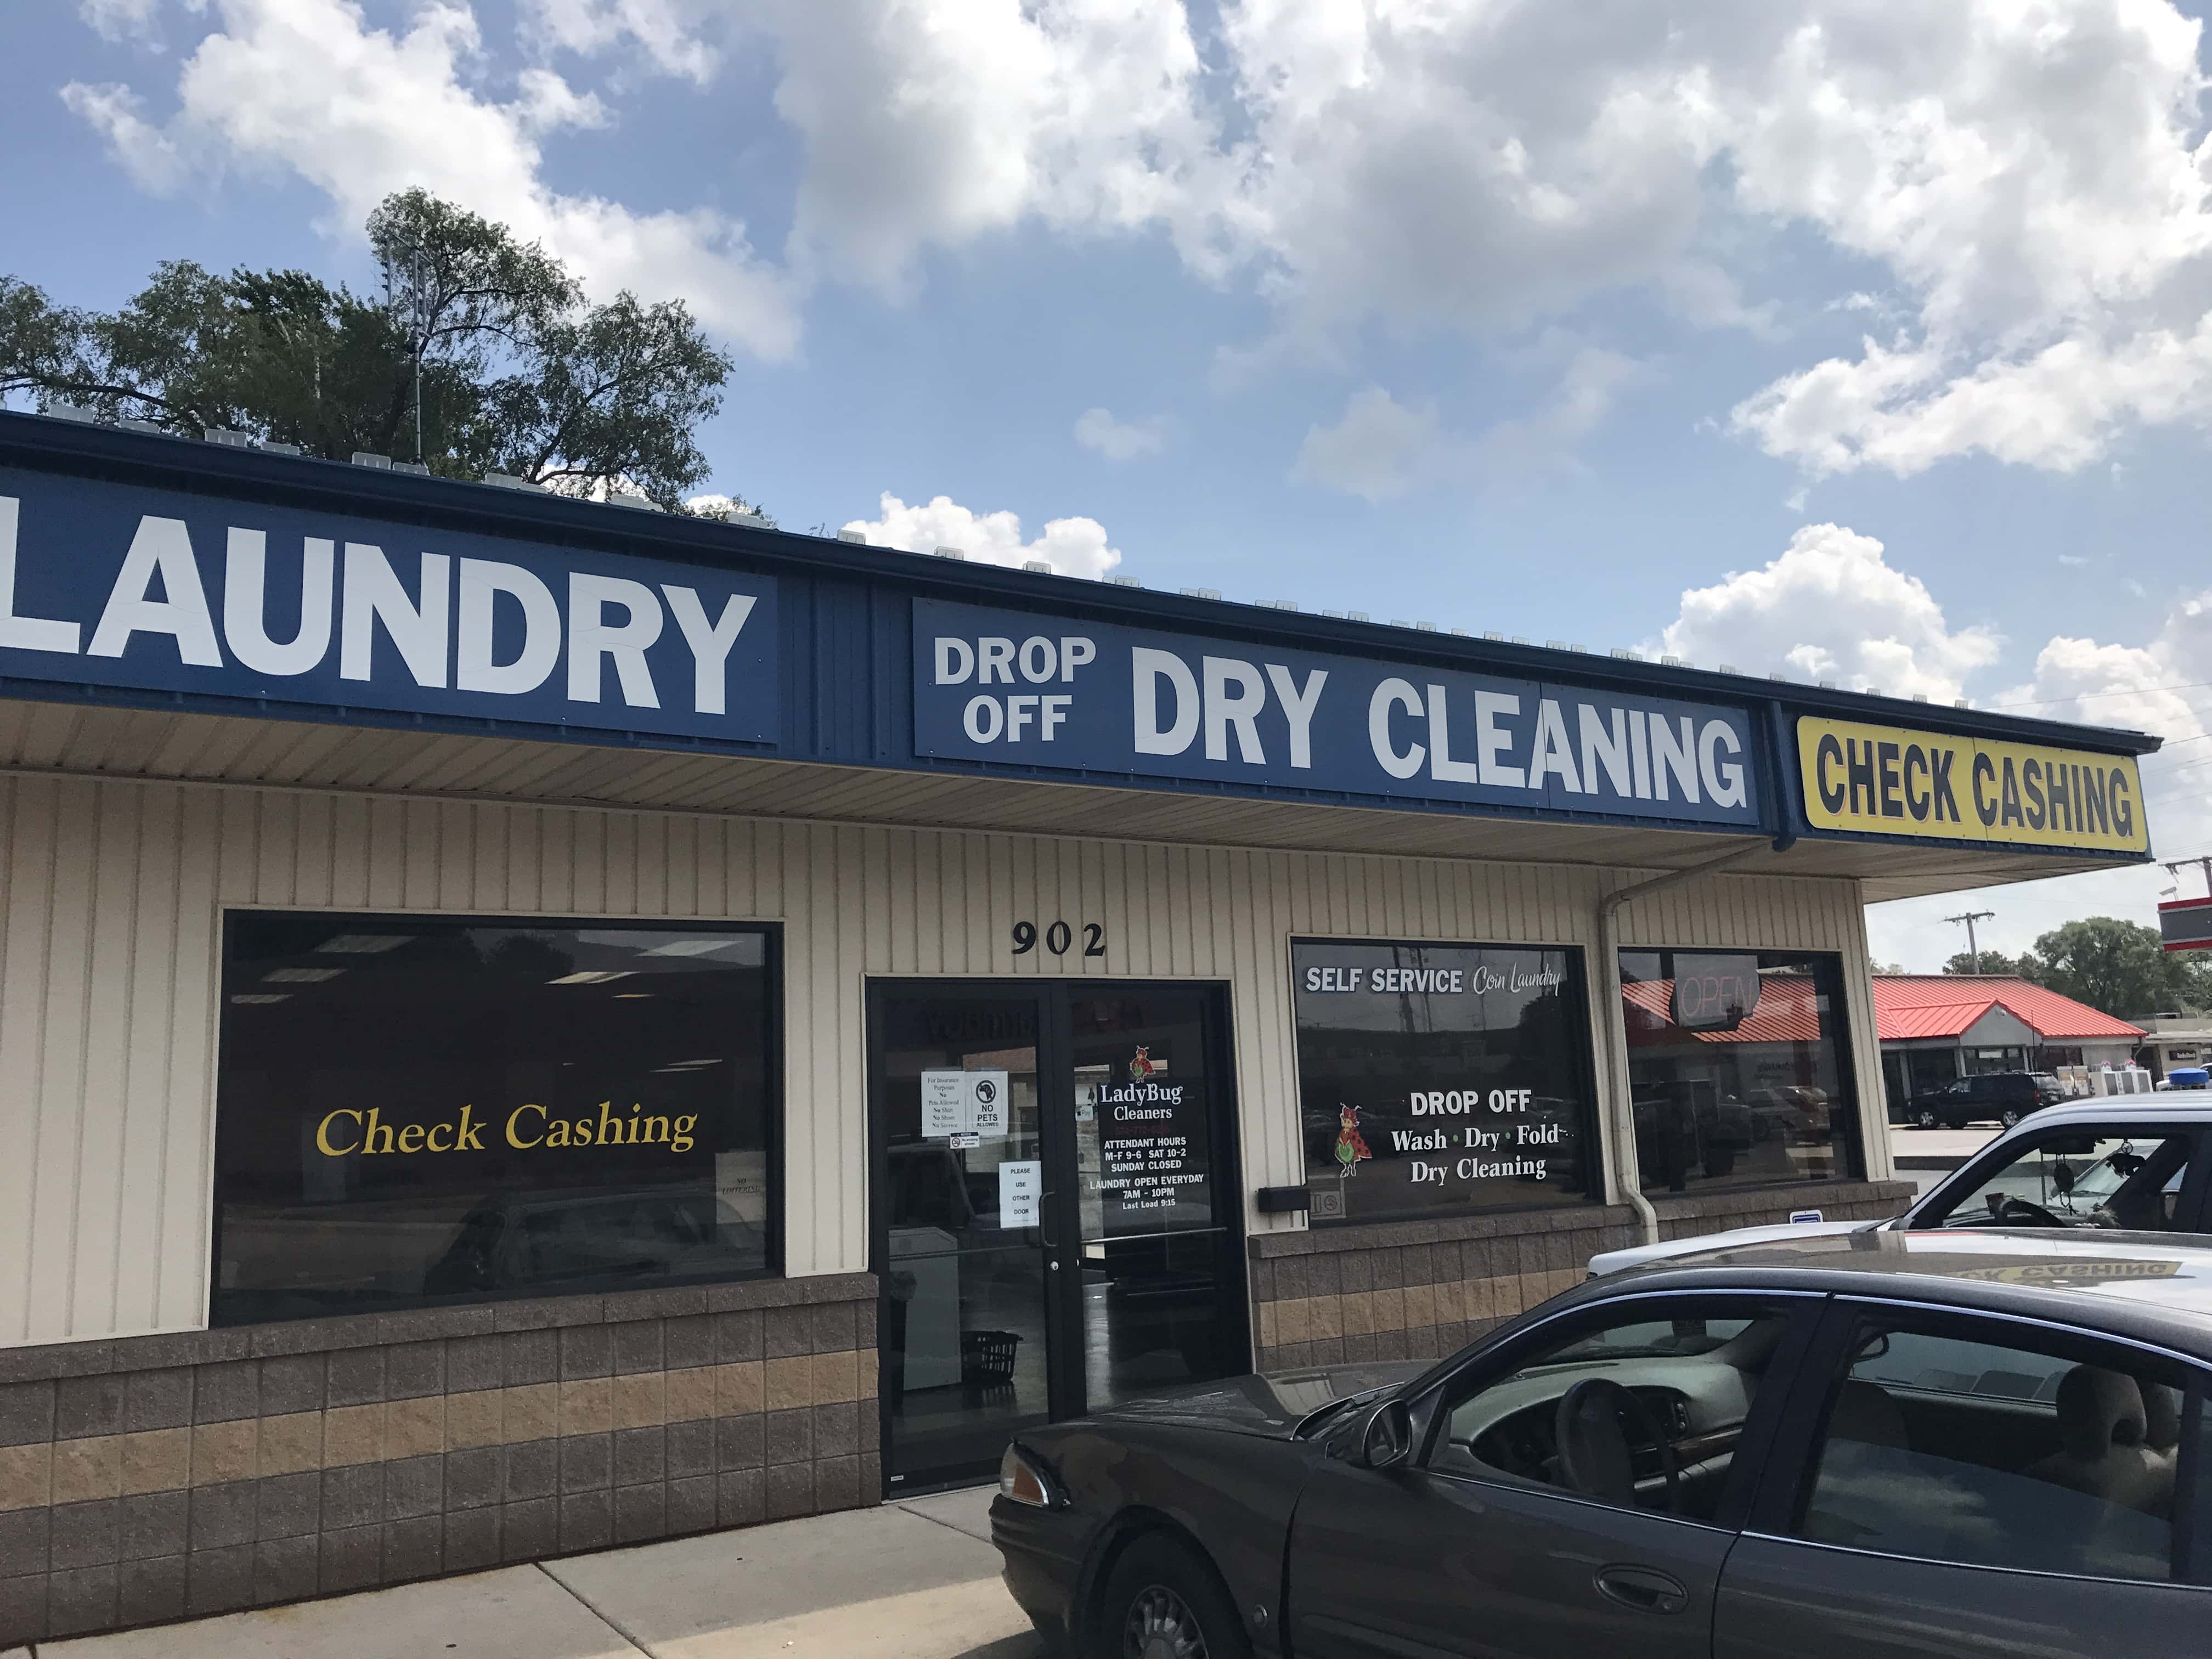 Ladybug Cleaners and Laundromat - Knox, IN, US, 24 hour laundry mat